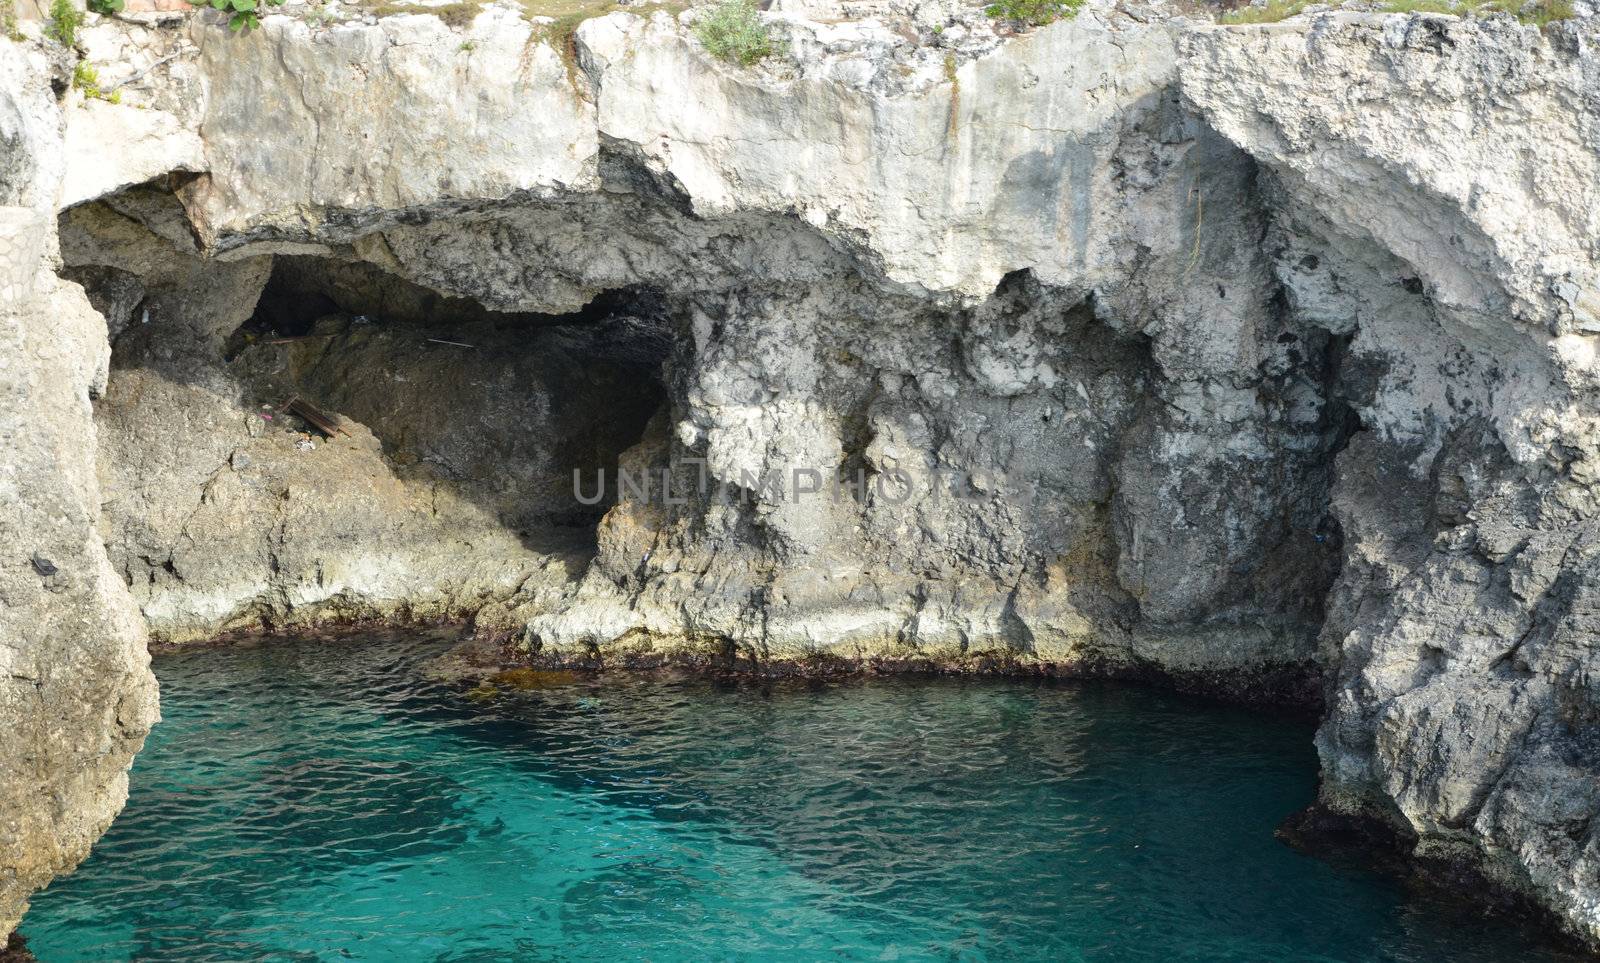 A deep pool with cliffs on three sides. On the coast of Jamaica